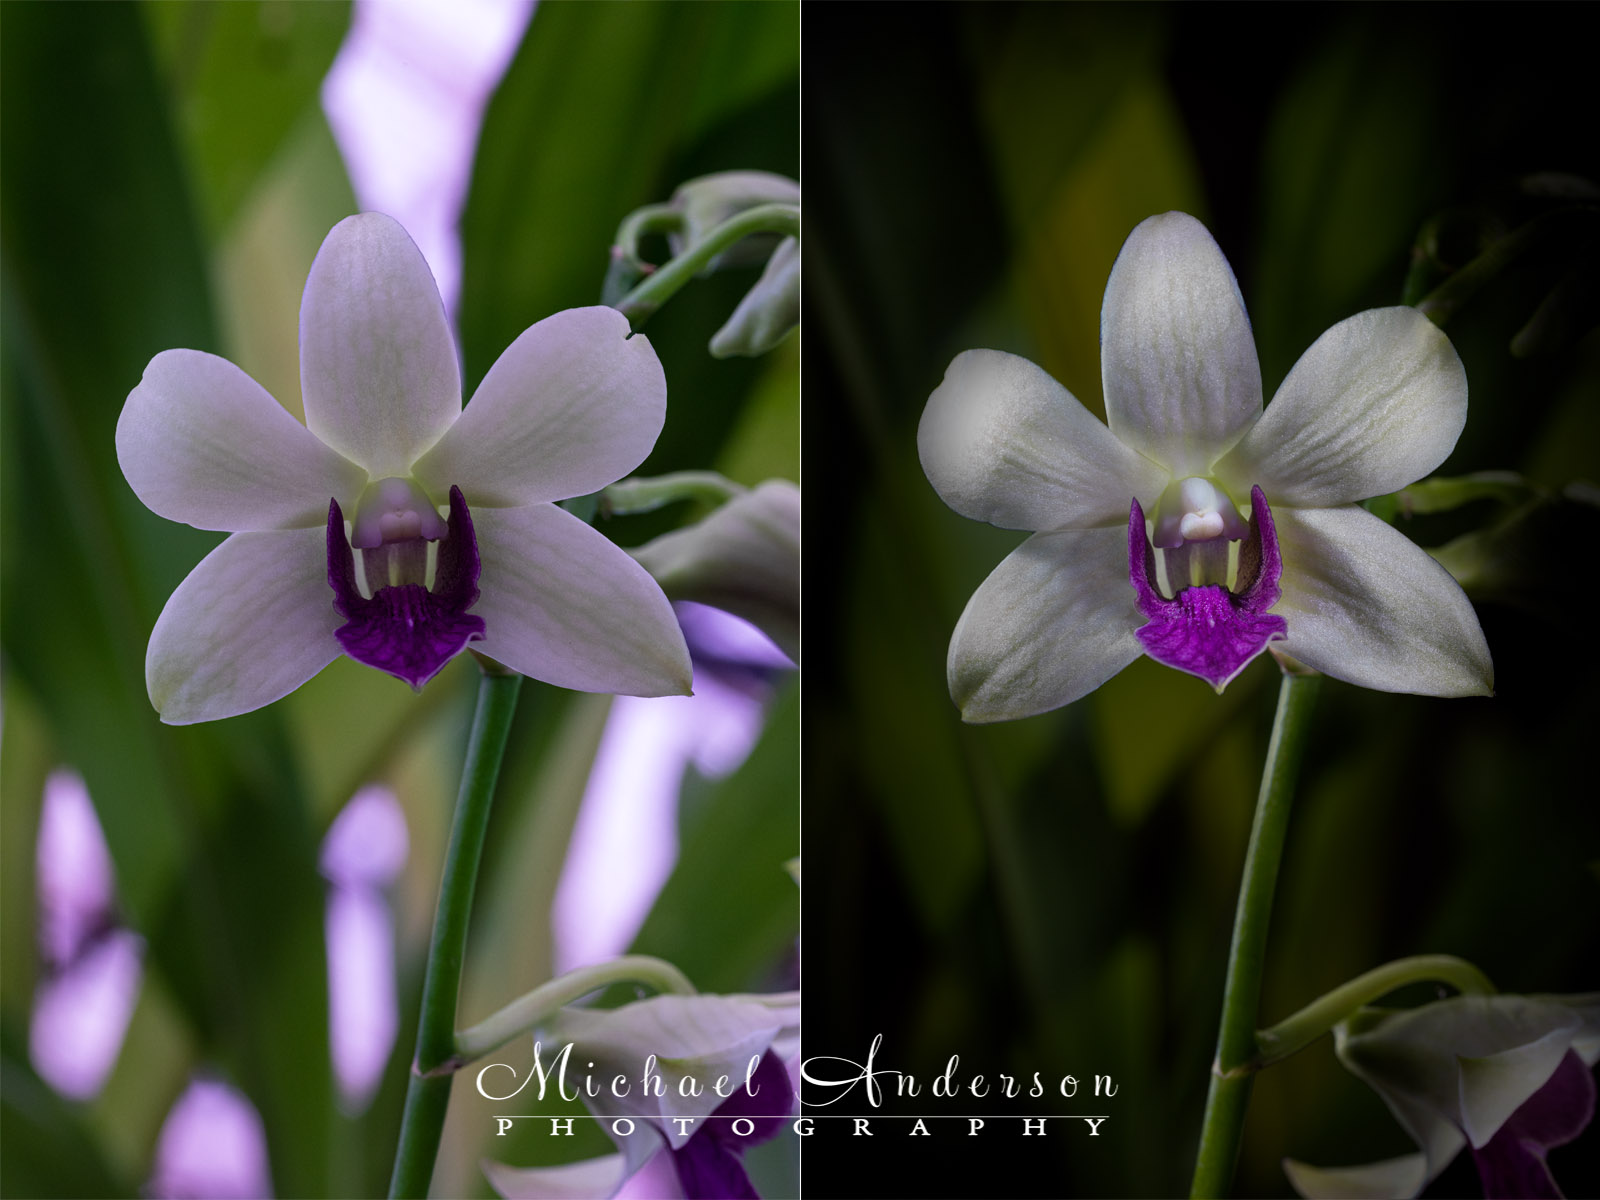 A before and after light painted photograph of a beautiful Dendrobium Orchid.